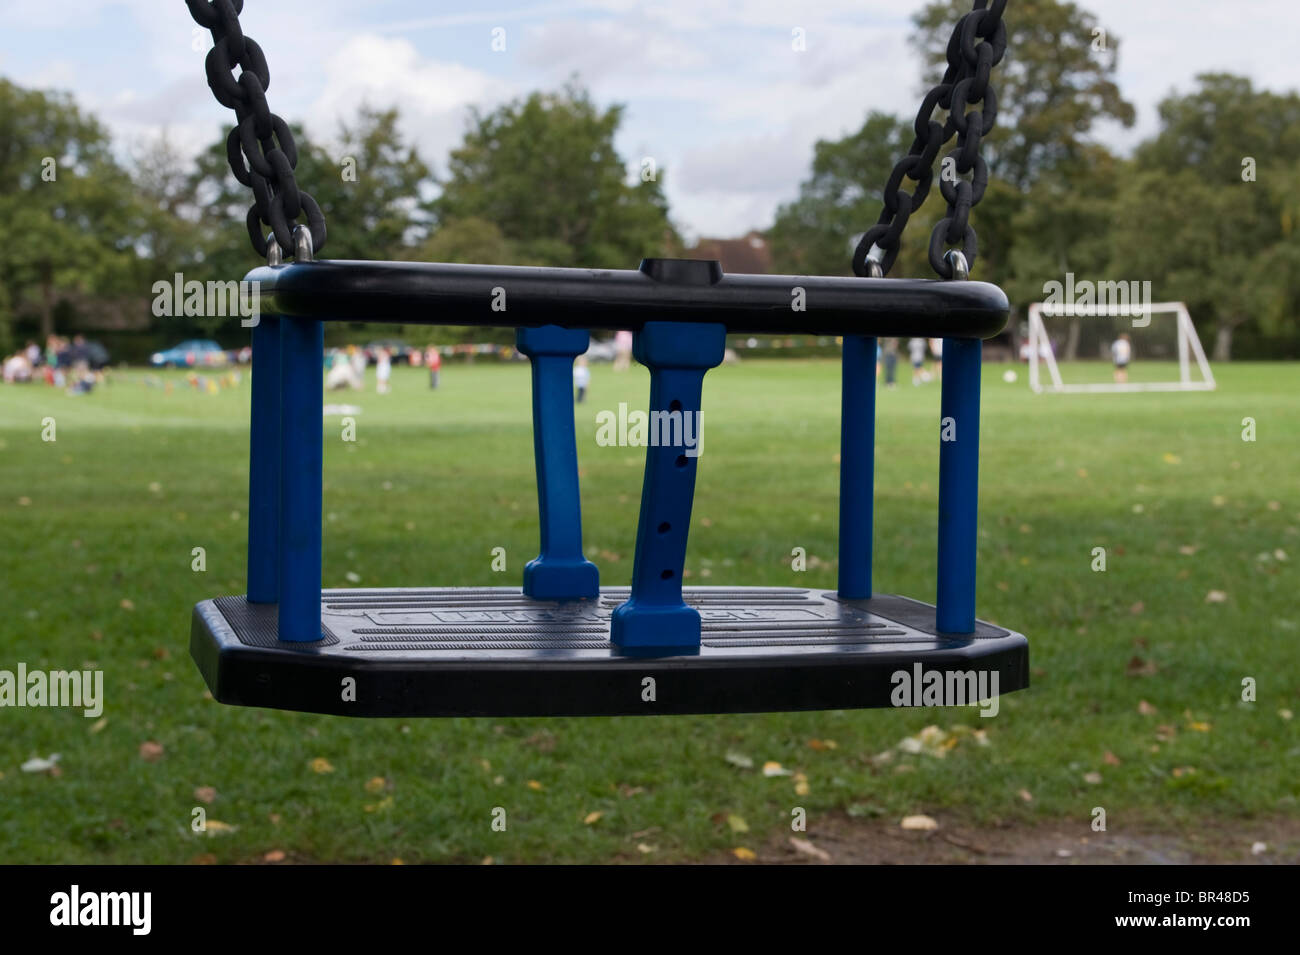 A blue child's swing seat in a children's playground on the village green in Jordans Buckinghamshire UK Stock Photo